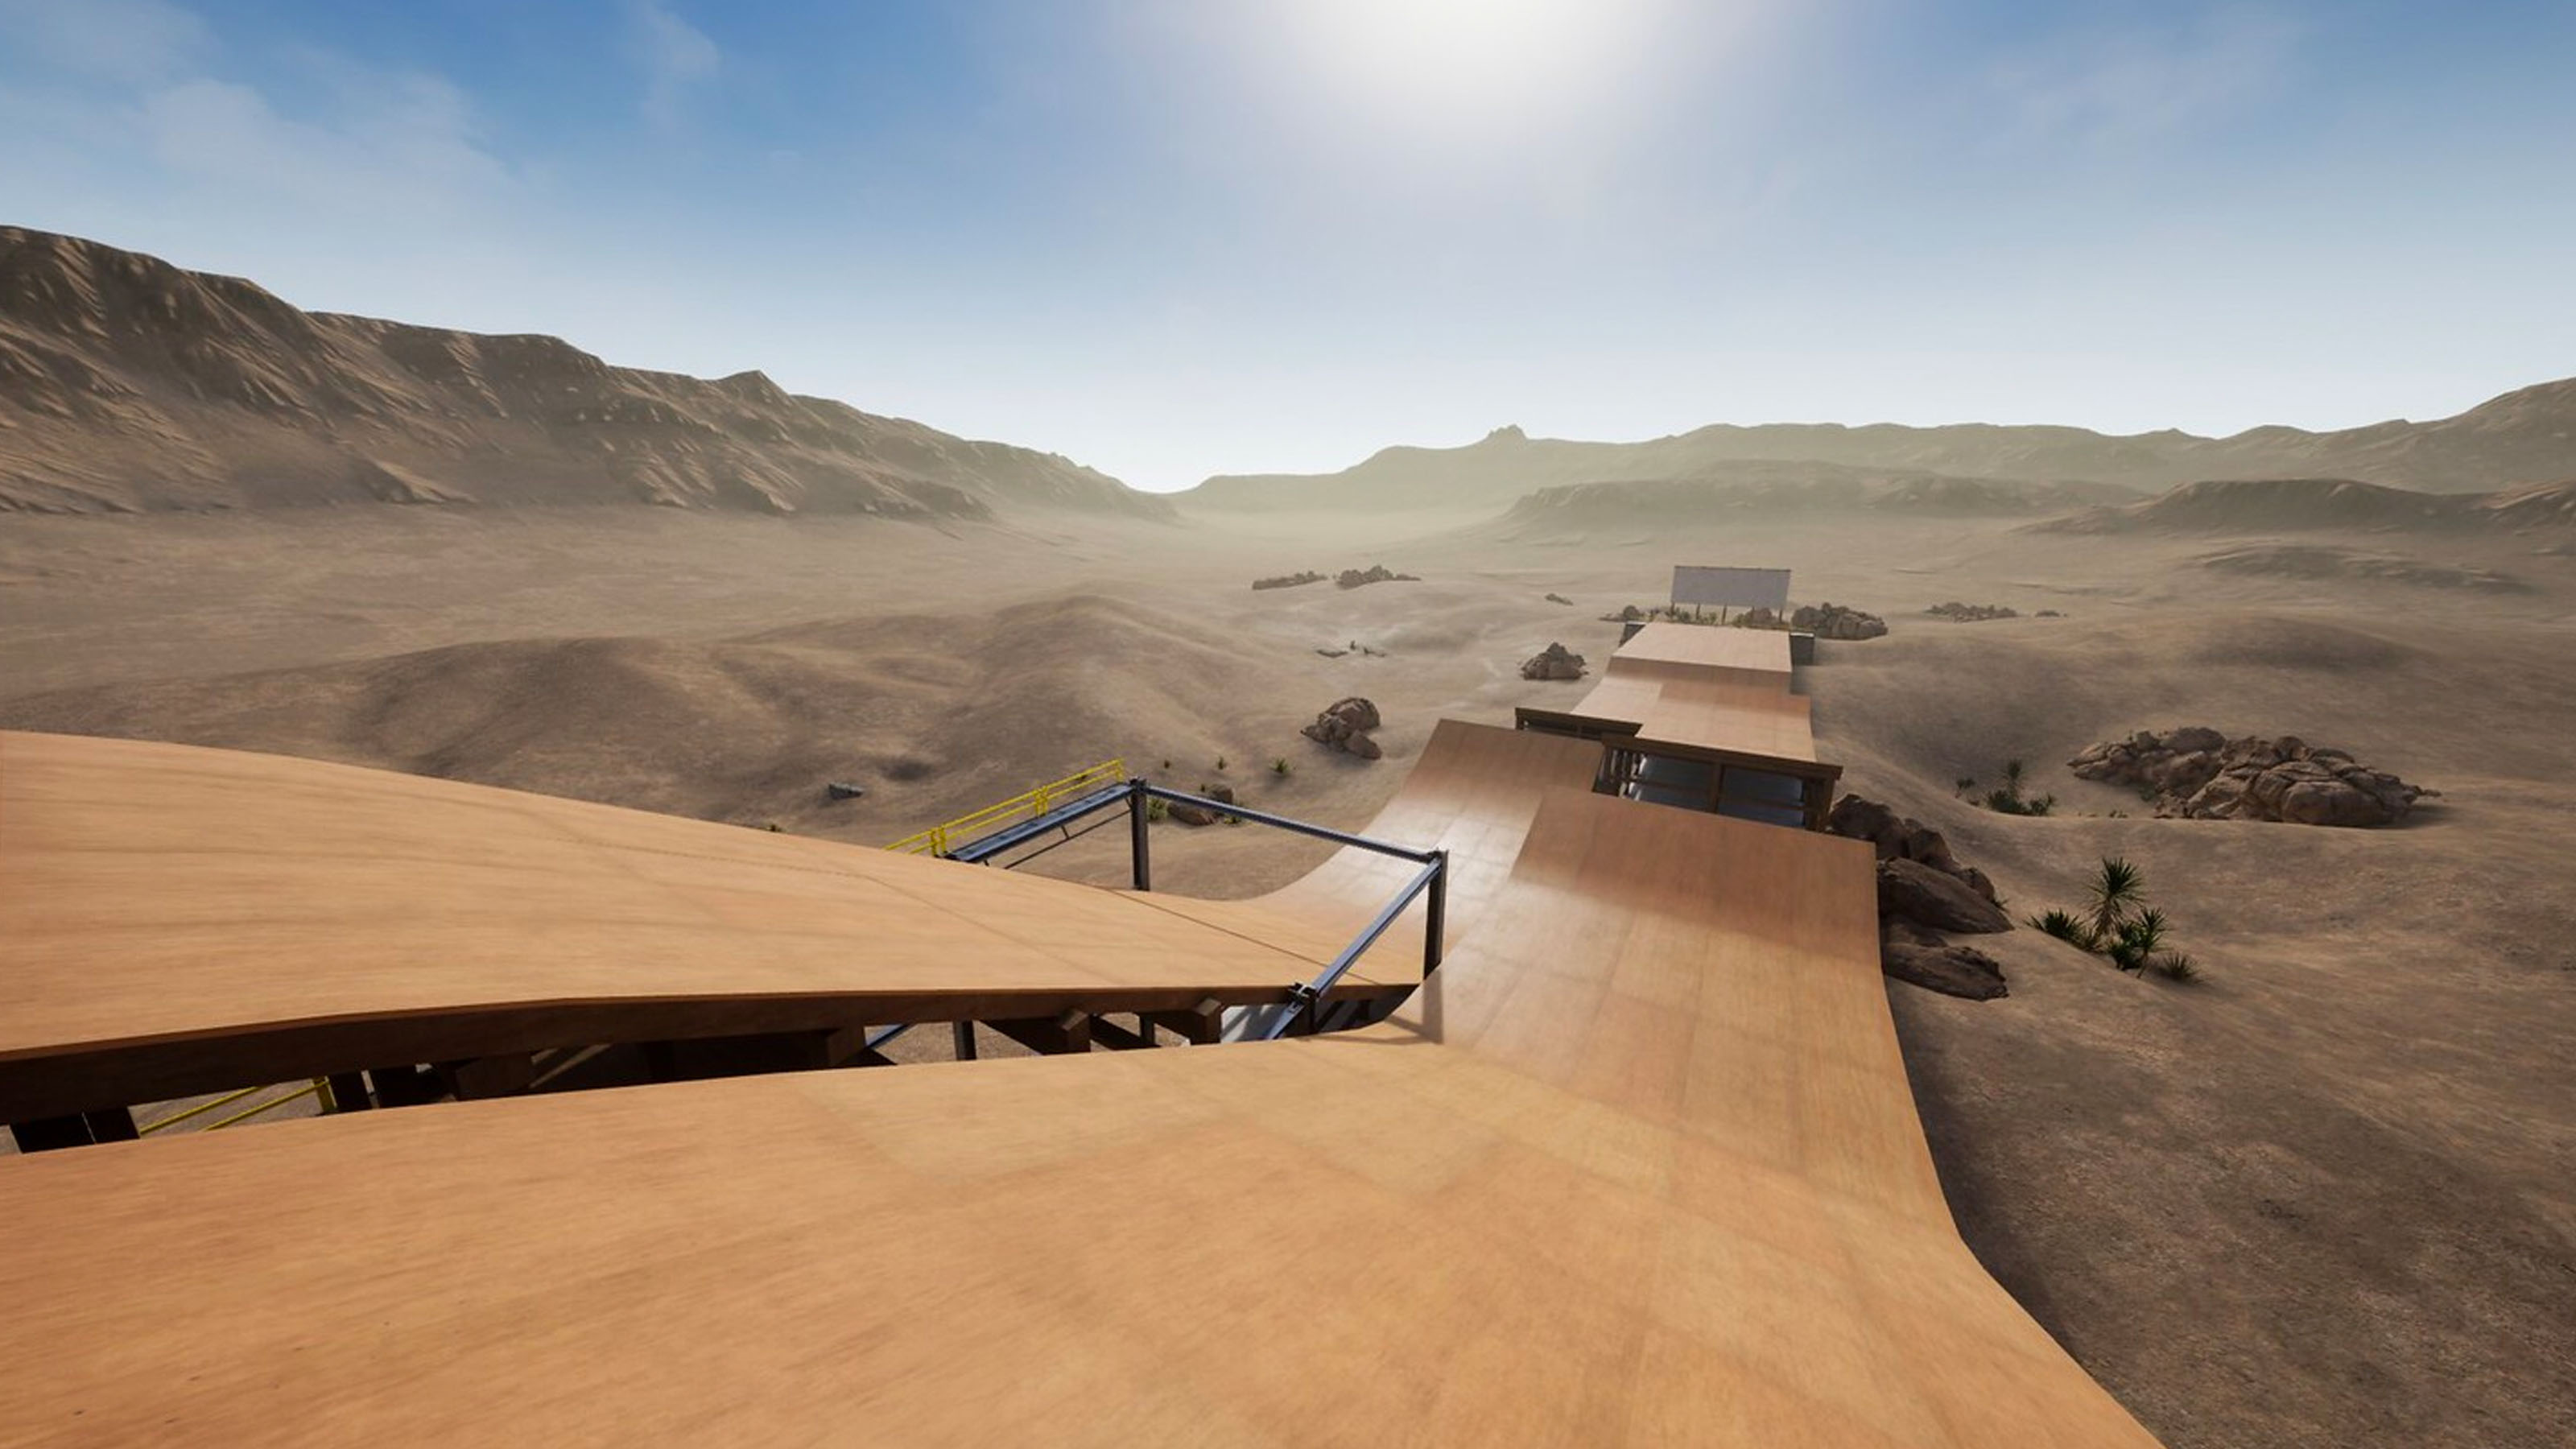 A screenshot from the game VR Skater showing some ramps in the middle of a desert